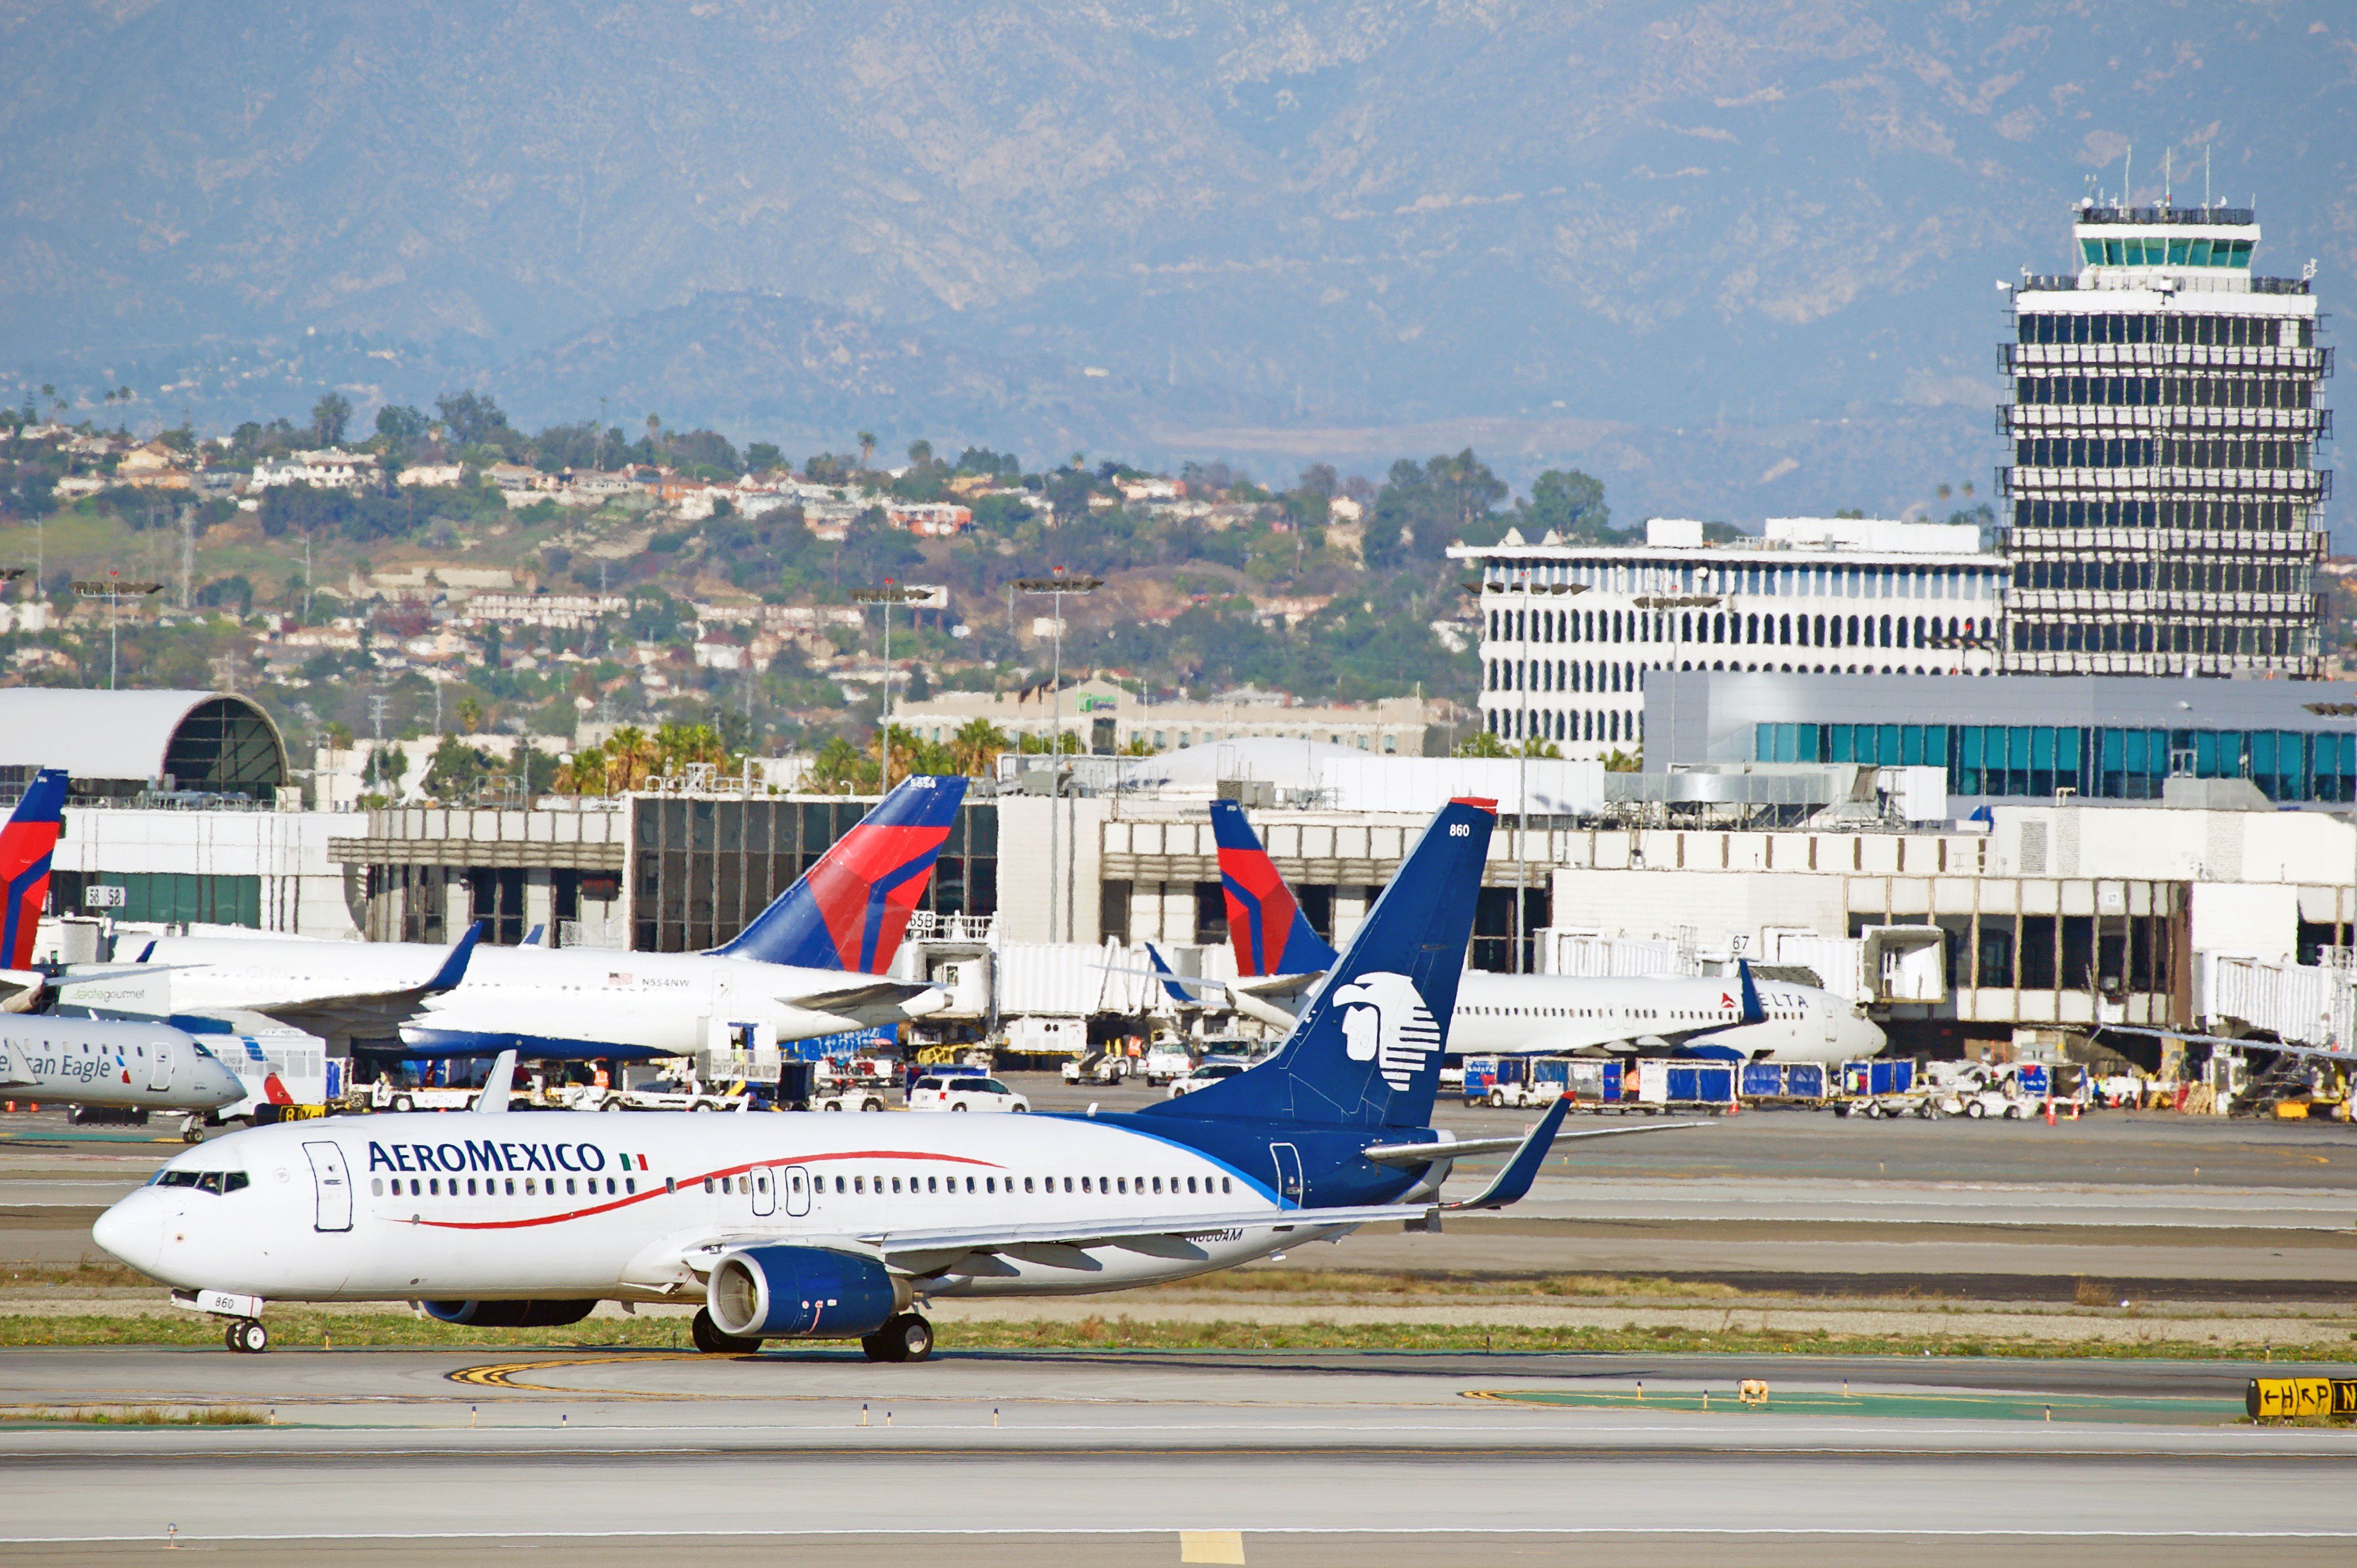 Aeromexico Boeing 737-800 at Los Angeles International Airport.